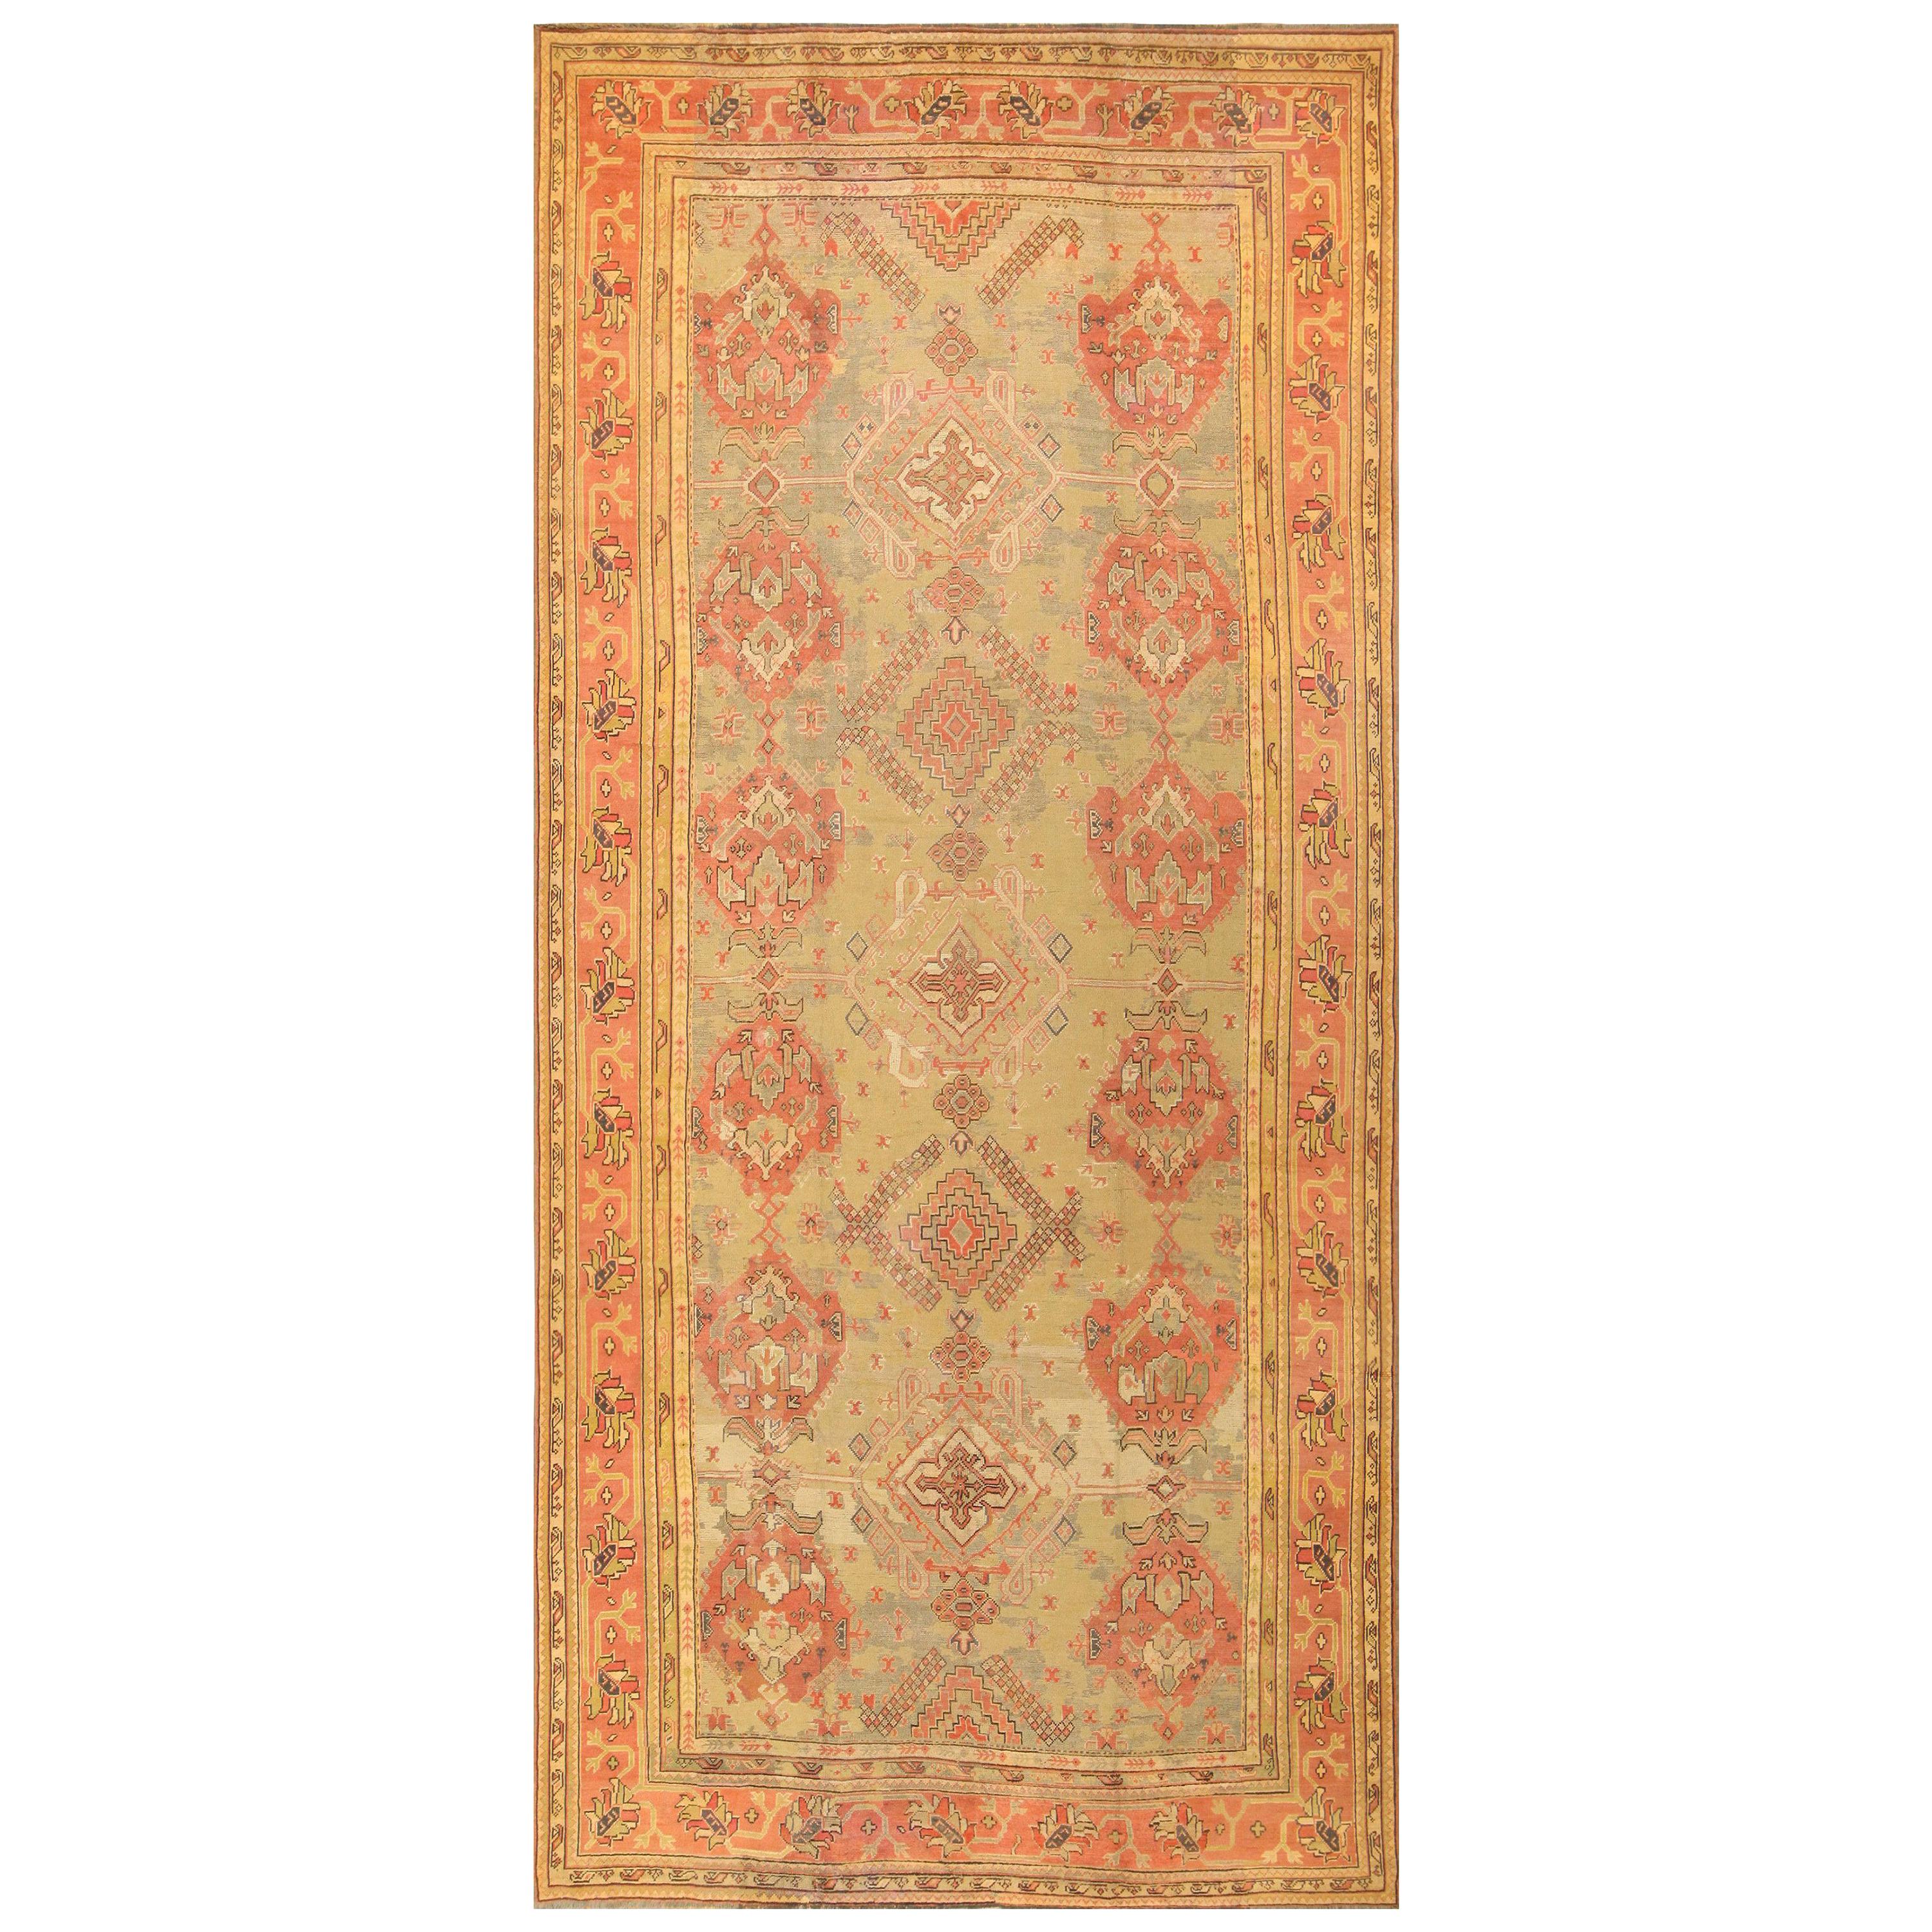 Antique Turkish Oushak Rug. Size: 11 ft 8 in x 25 ft For Sale